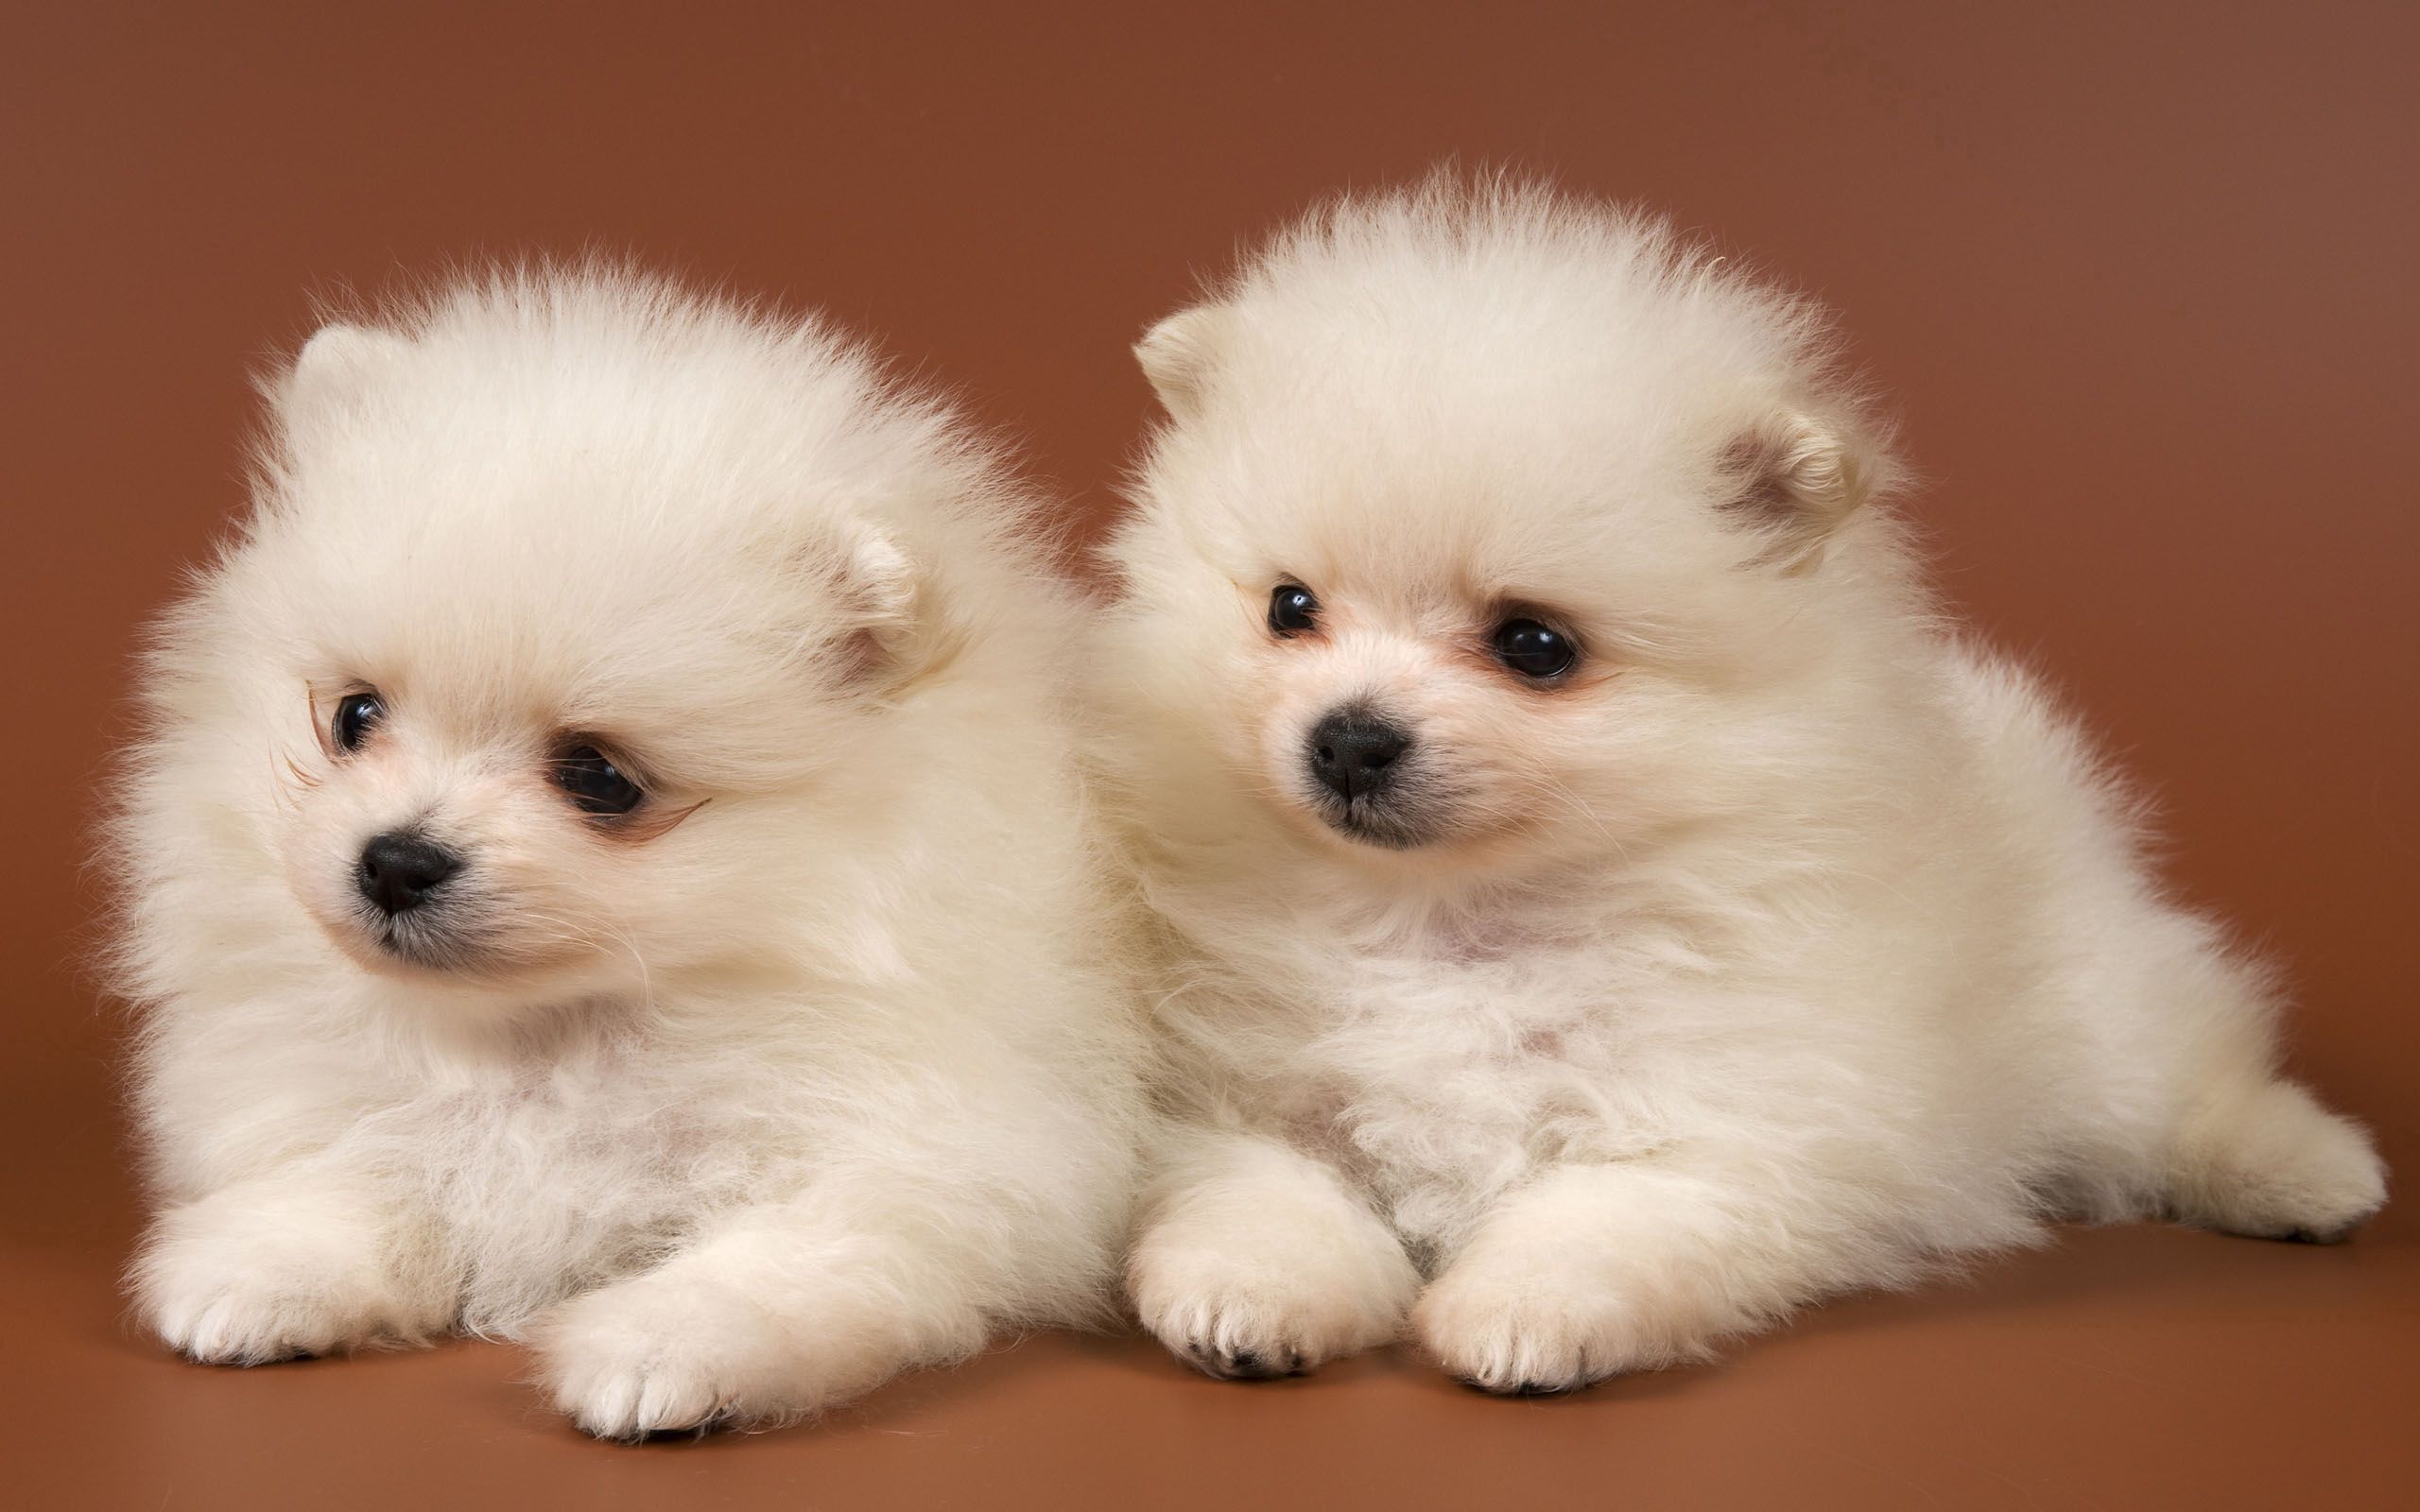 puppies, animals, couple, pair, toddlers, kids